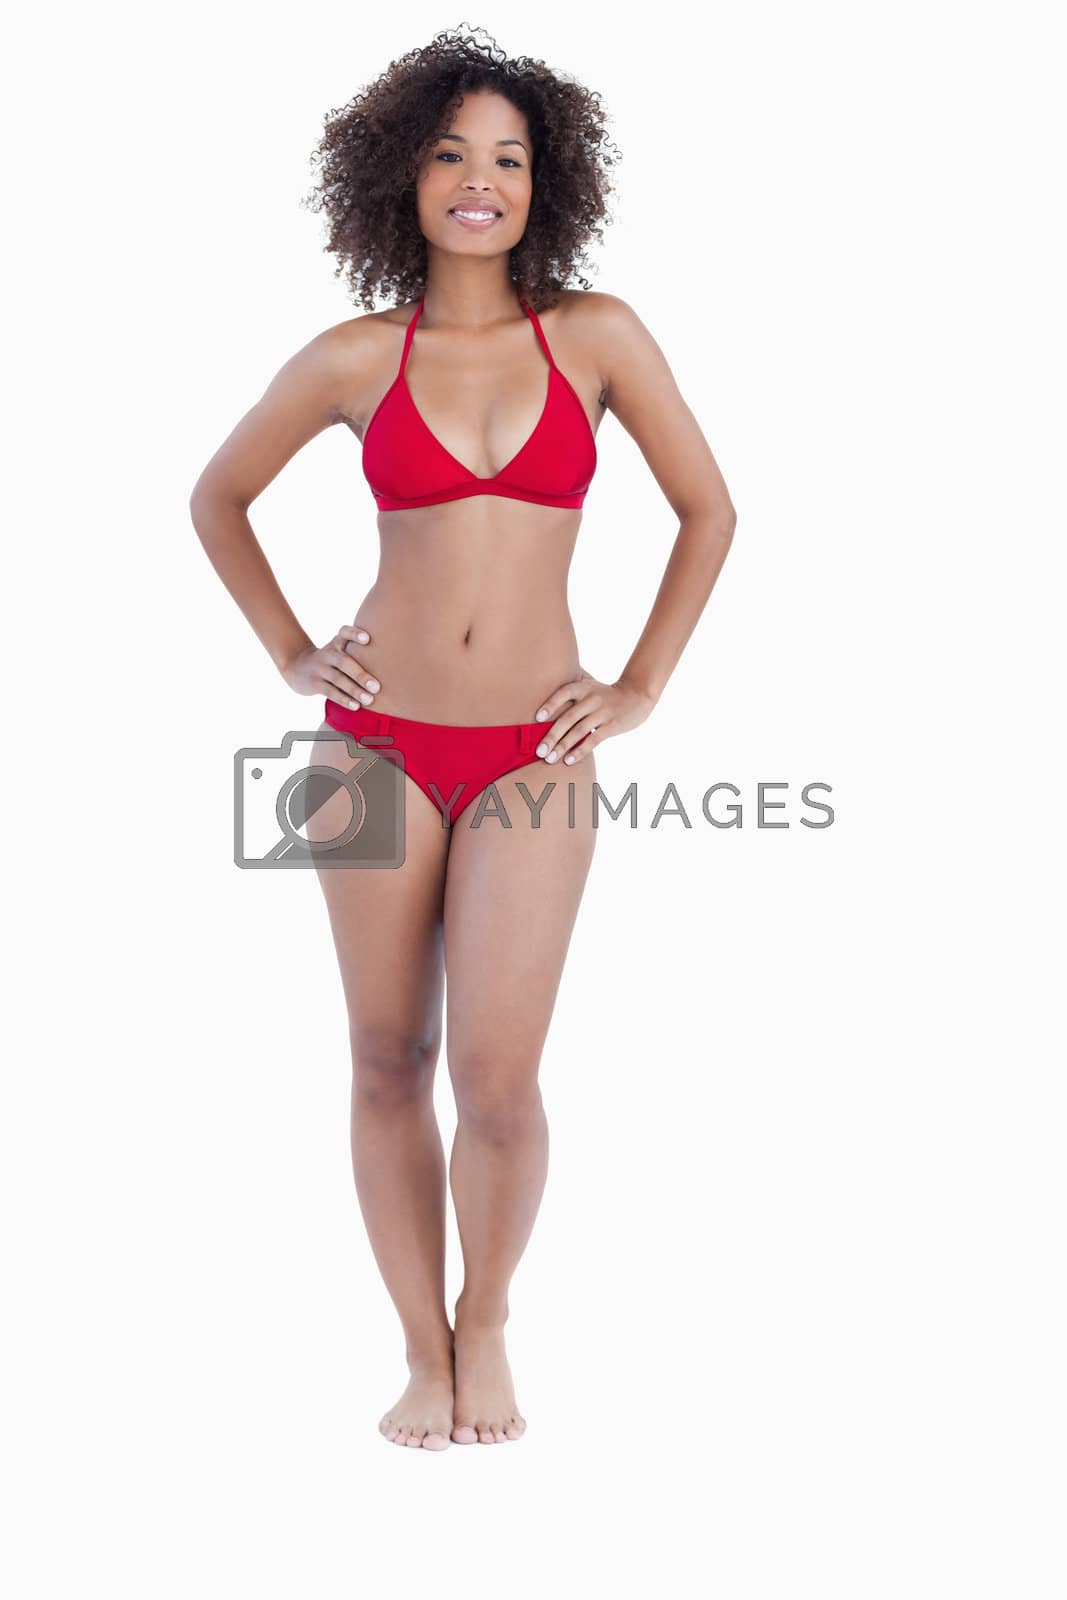 Royalty free image of Smiling woman standing upright in swimsuit by Wavebreakmedia